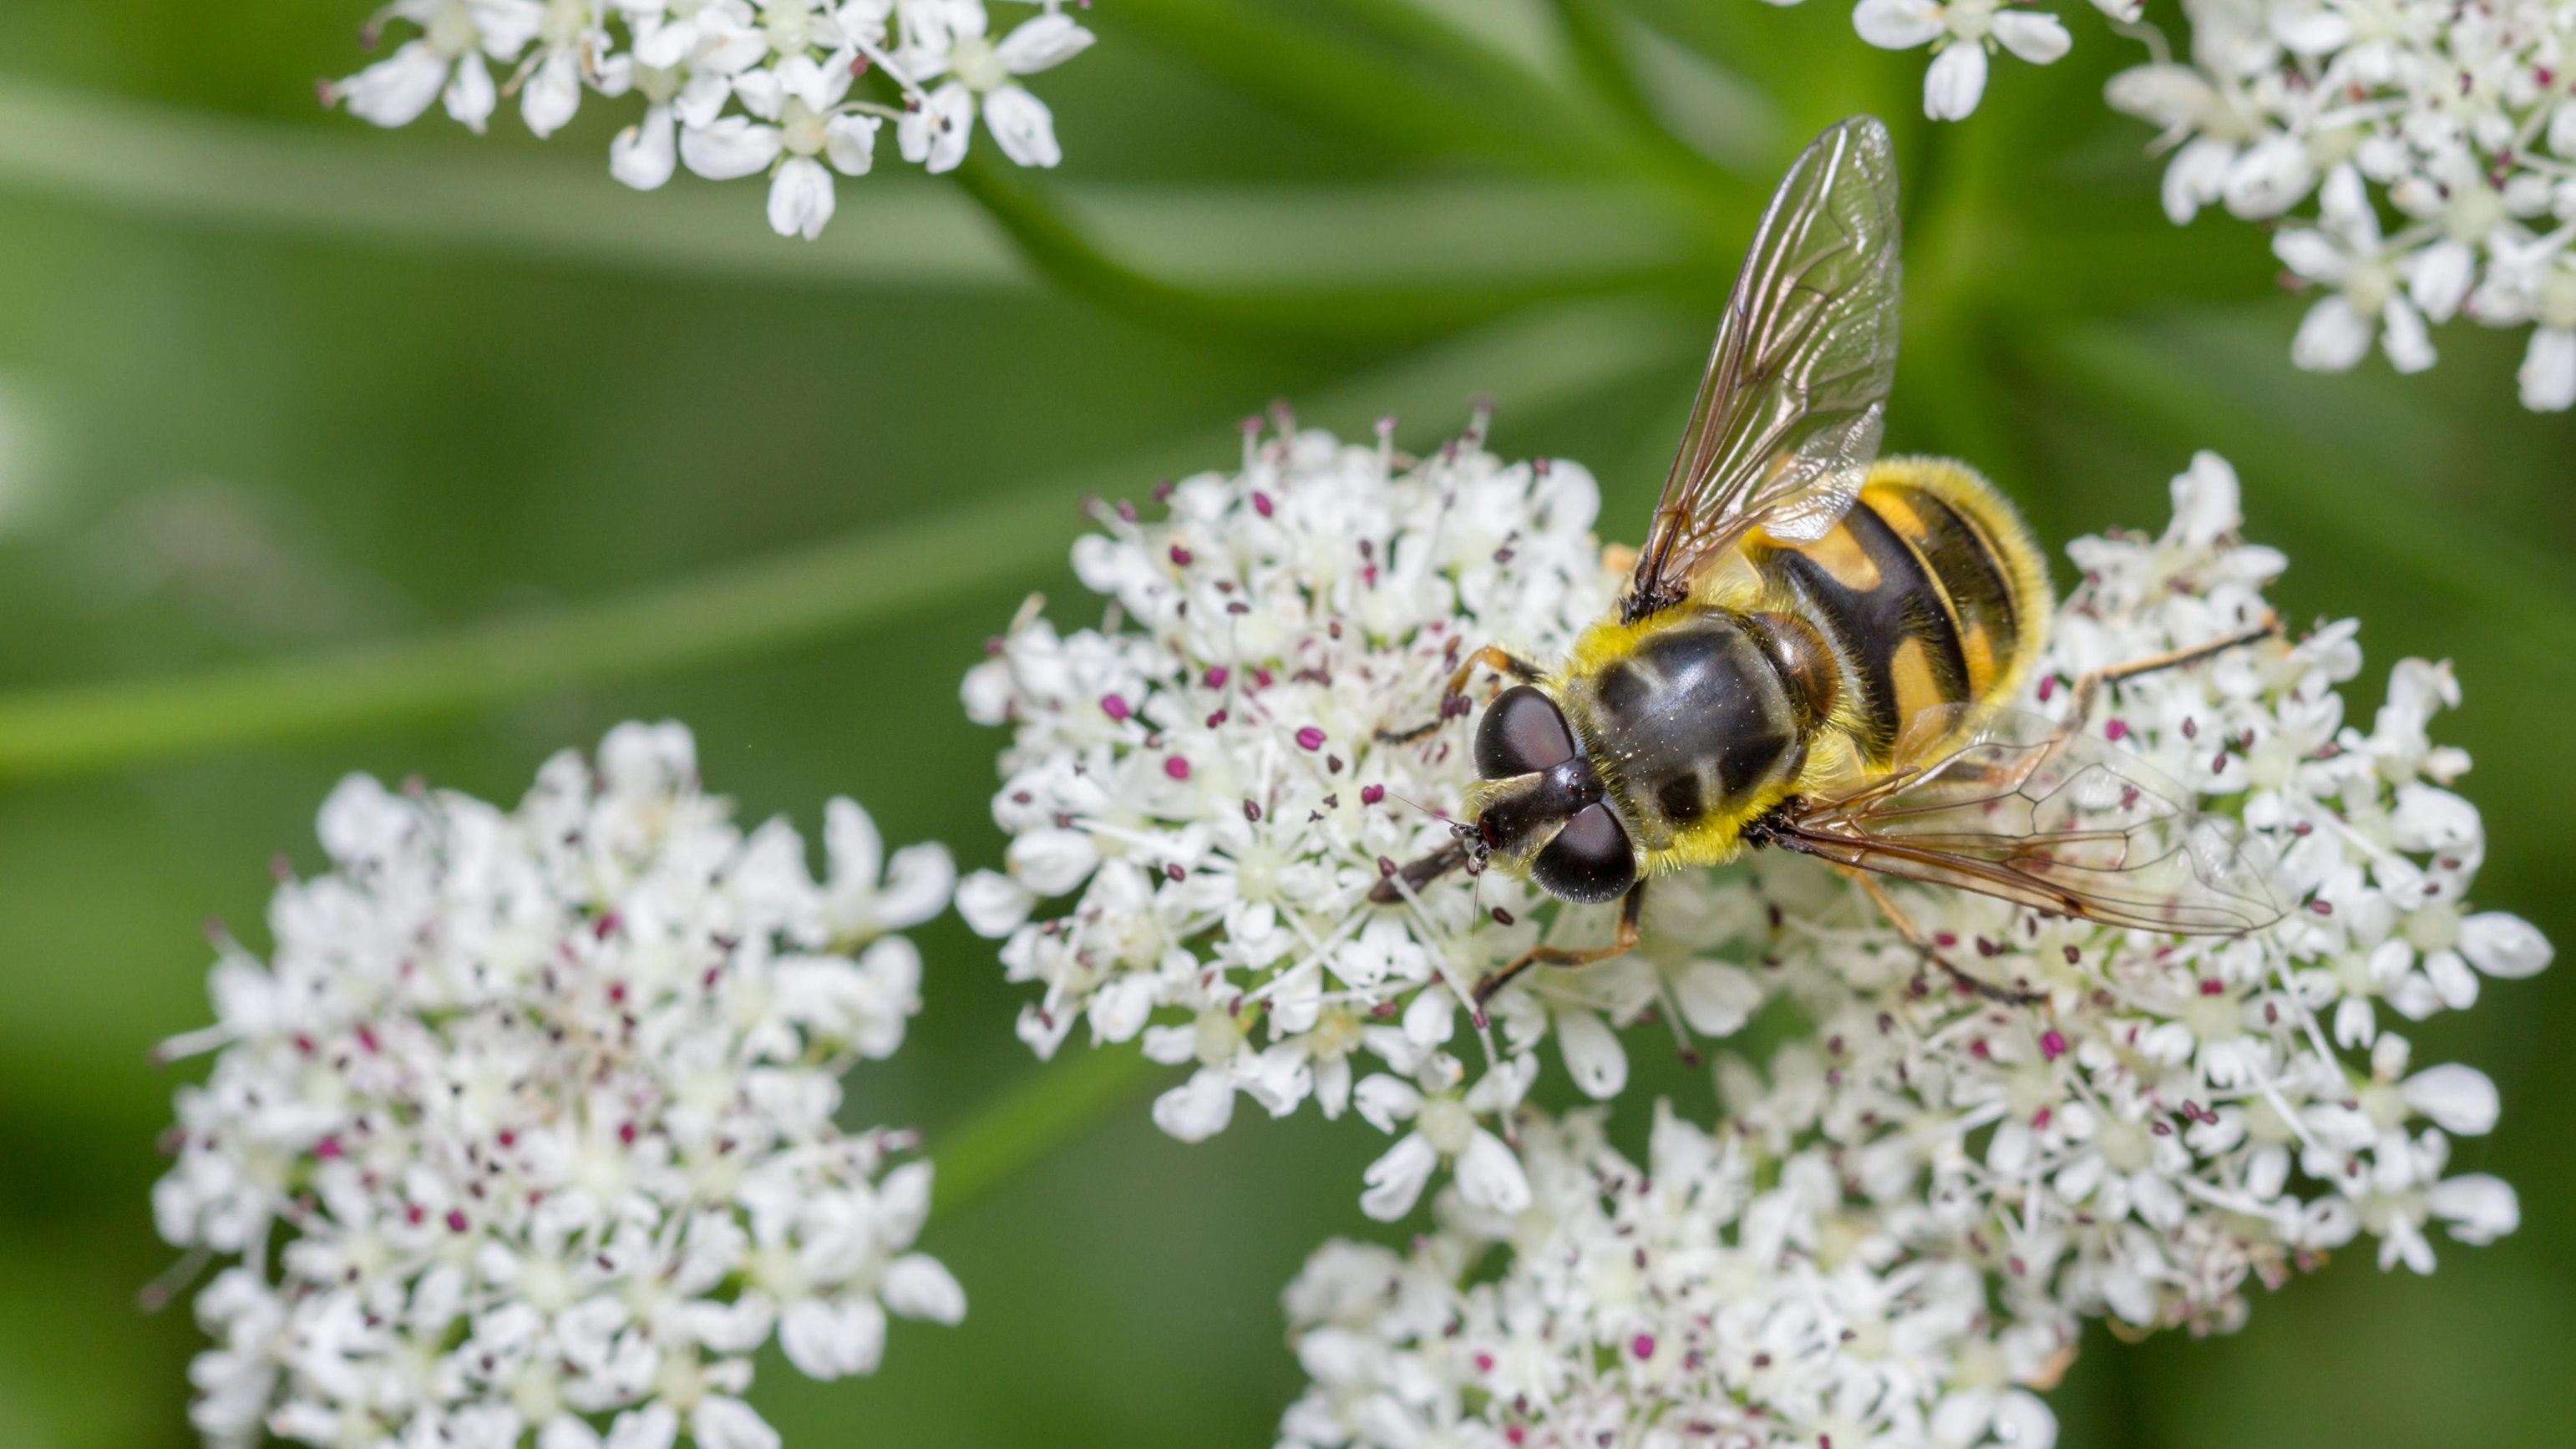 Hoverfly on cow parsley (Alamy/PA)